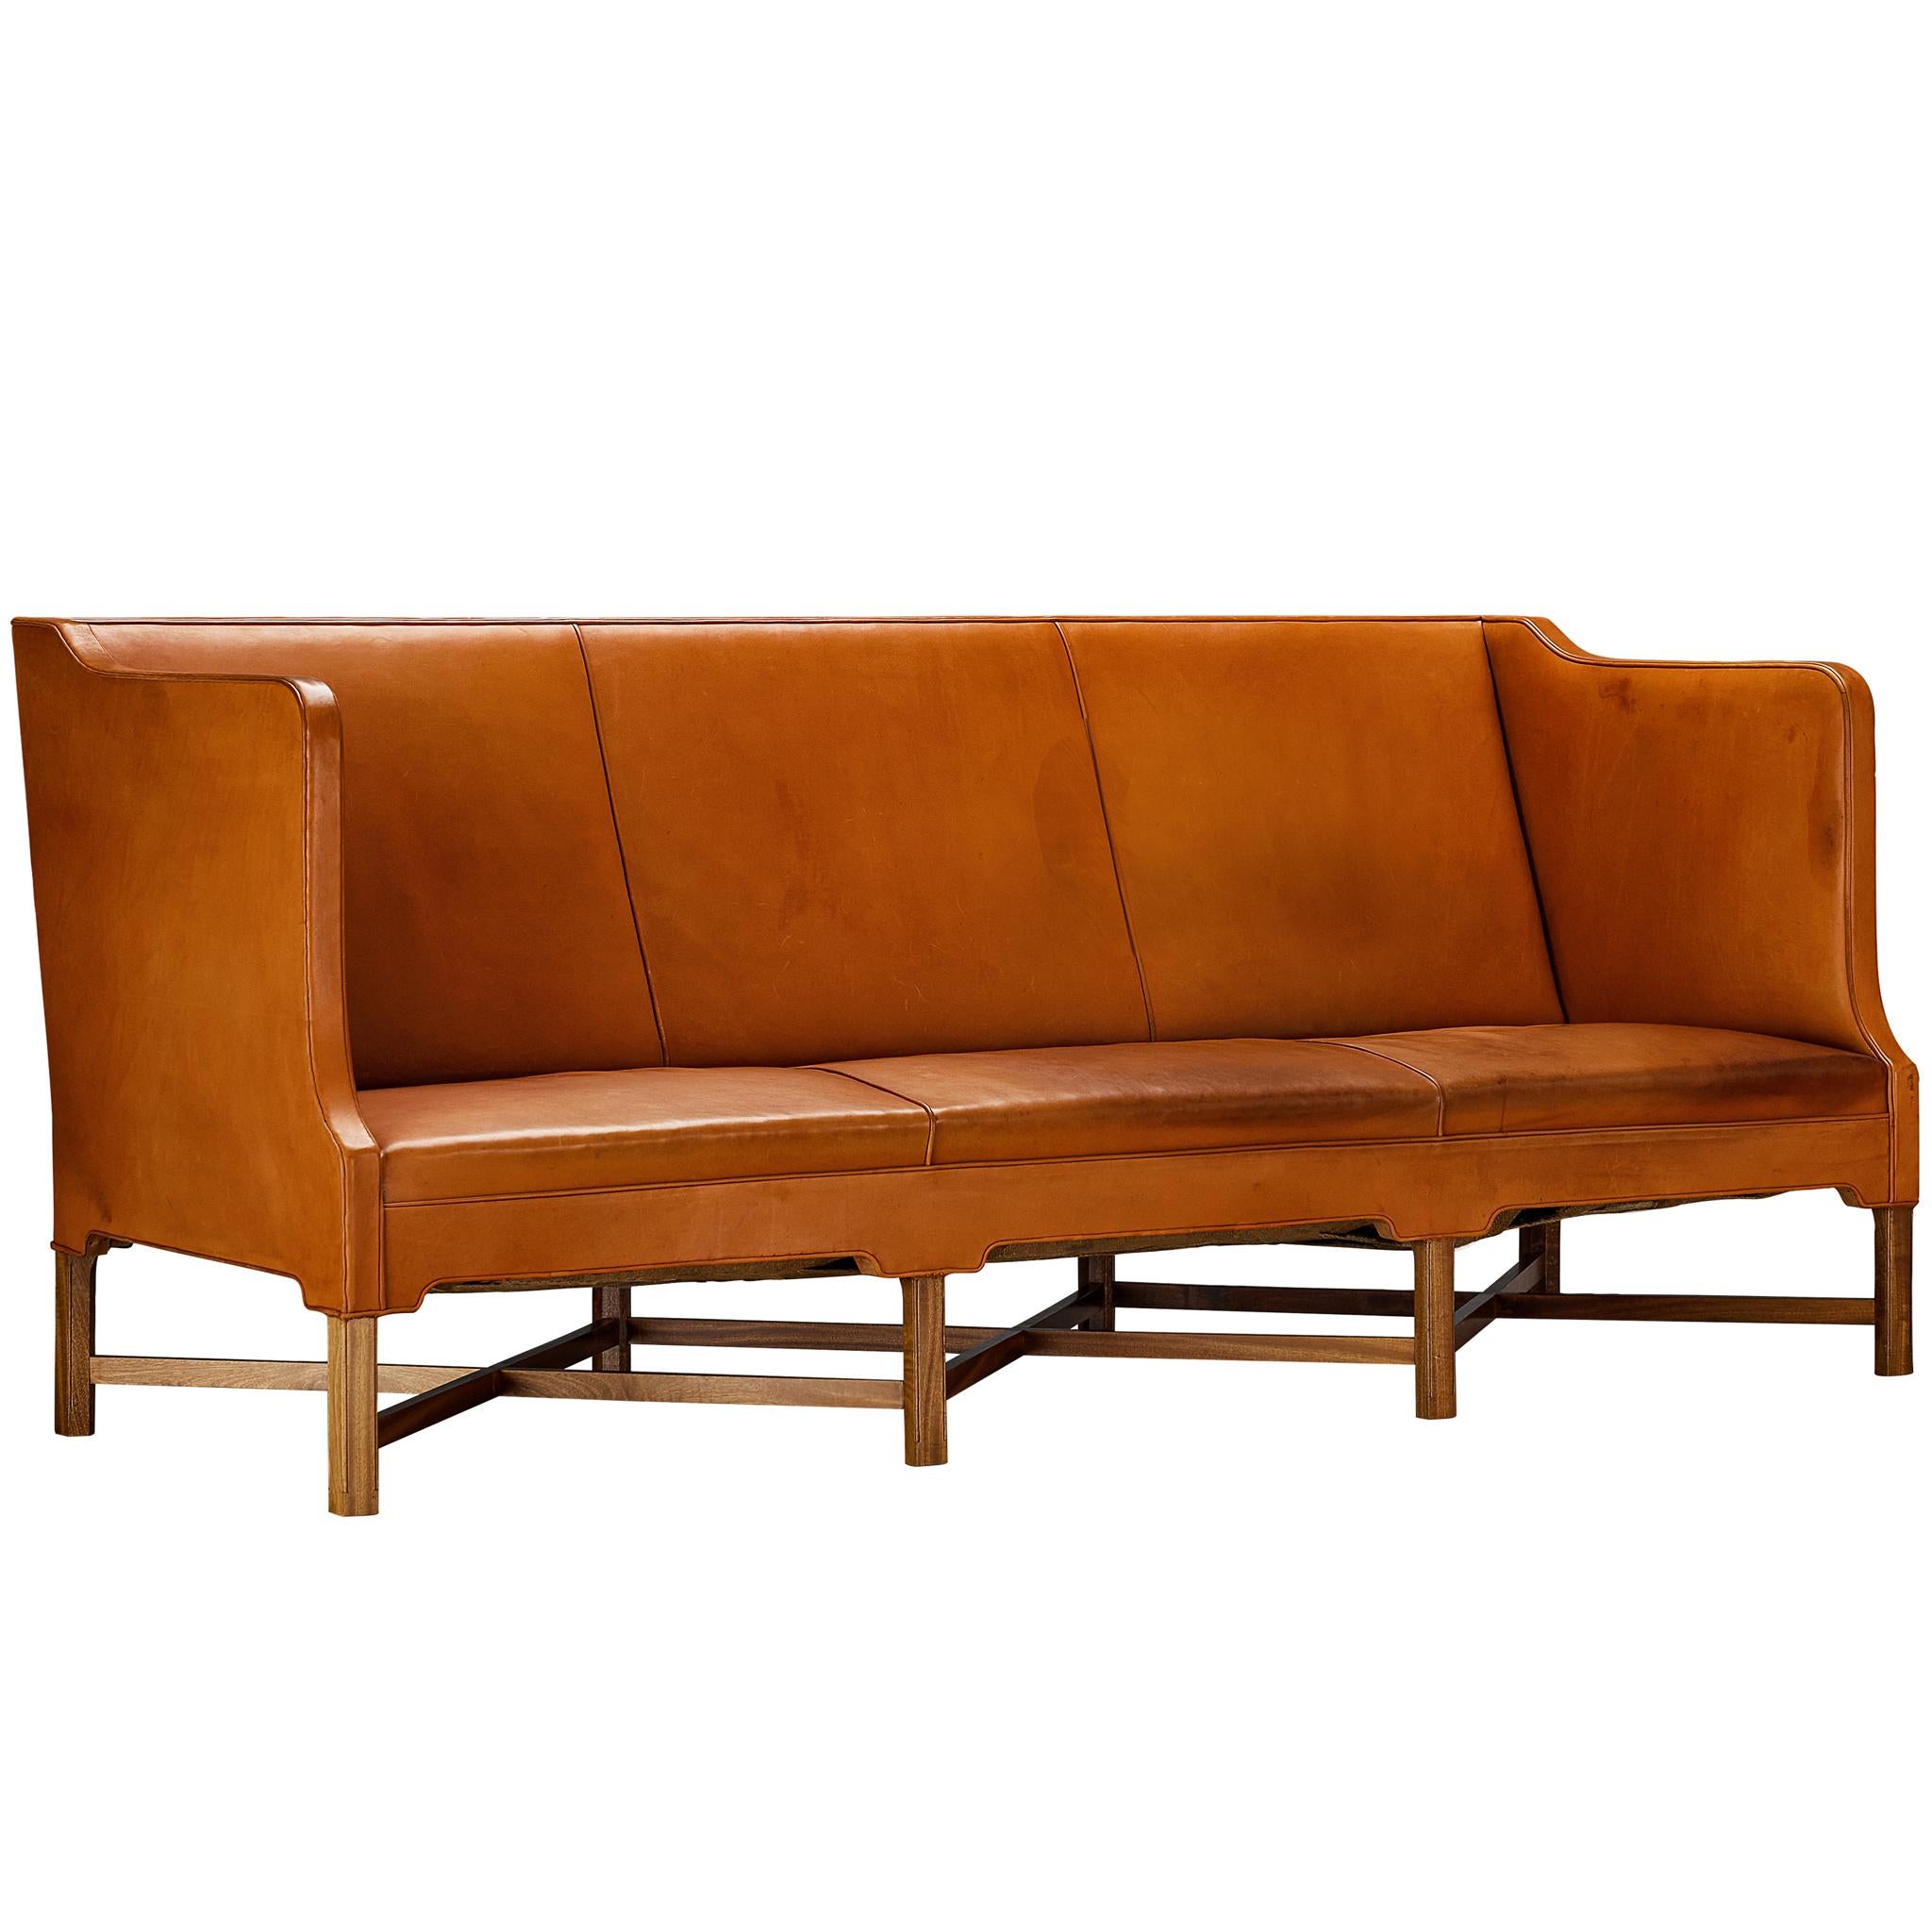 Kaare Klint for Rud. Rasmussen Sofa Model 4118 in Leather and Mahogany 